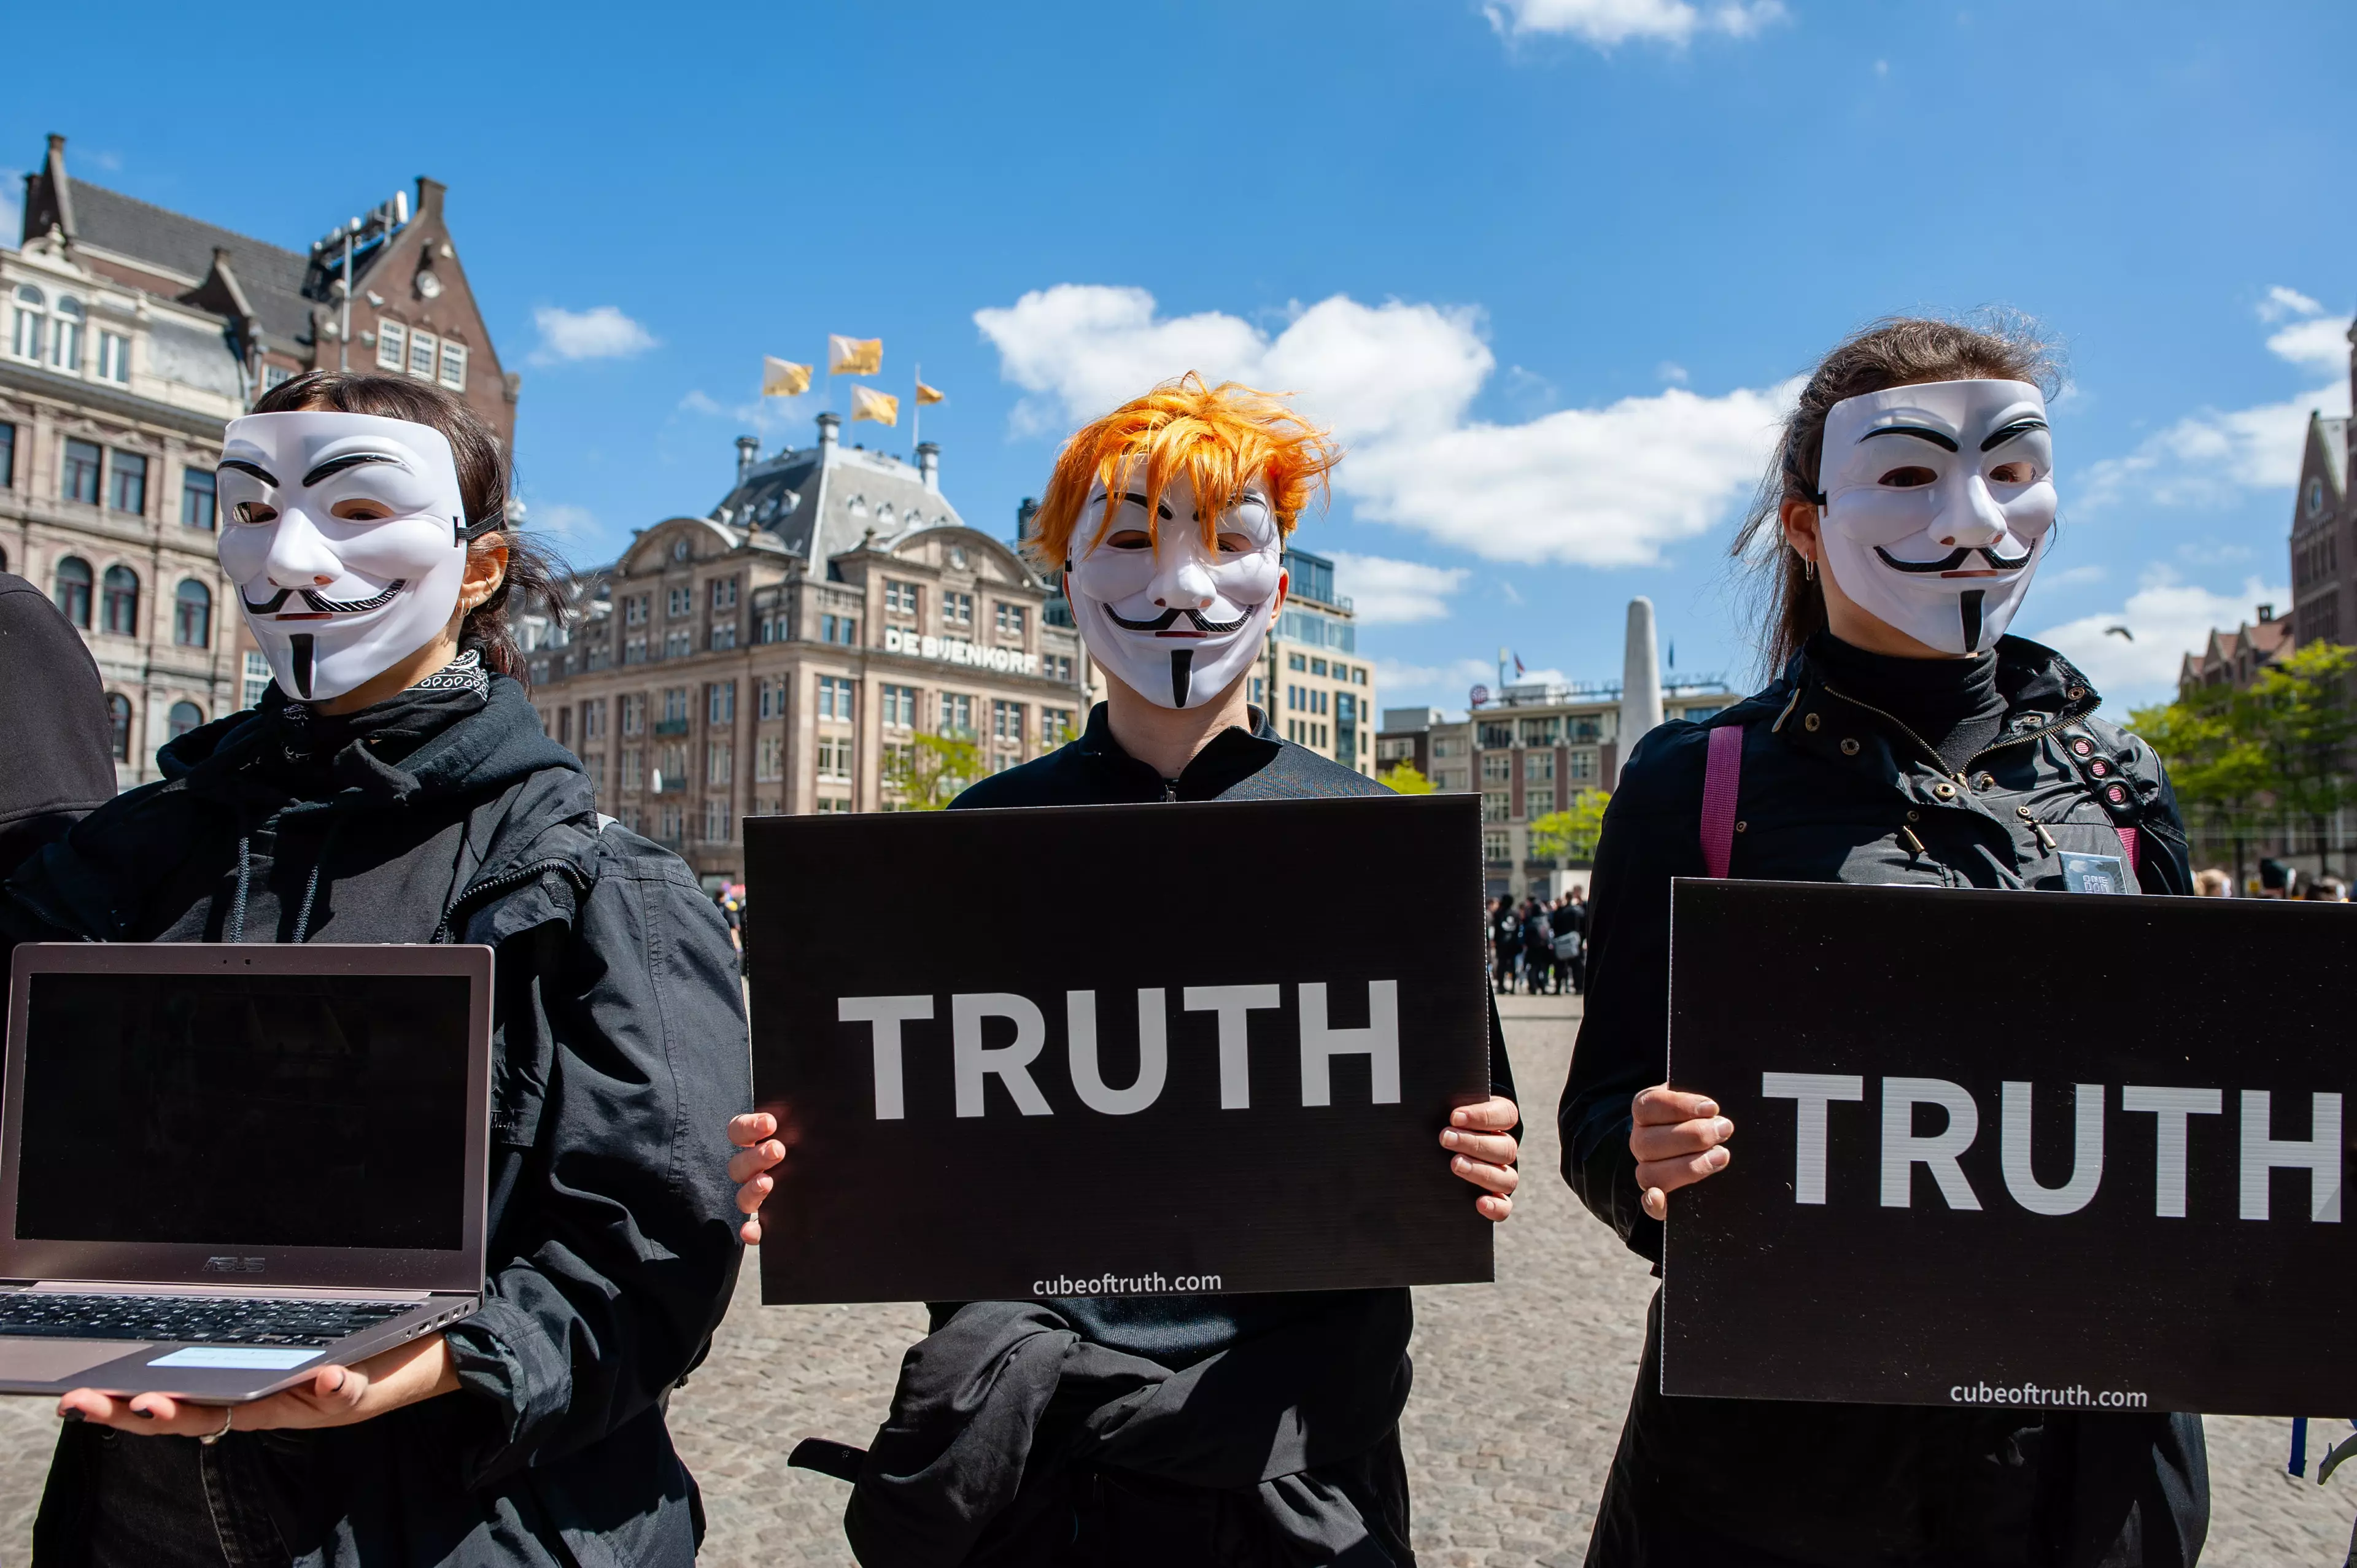 Cube of Truth protests take place all over the world.